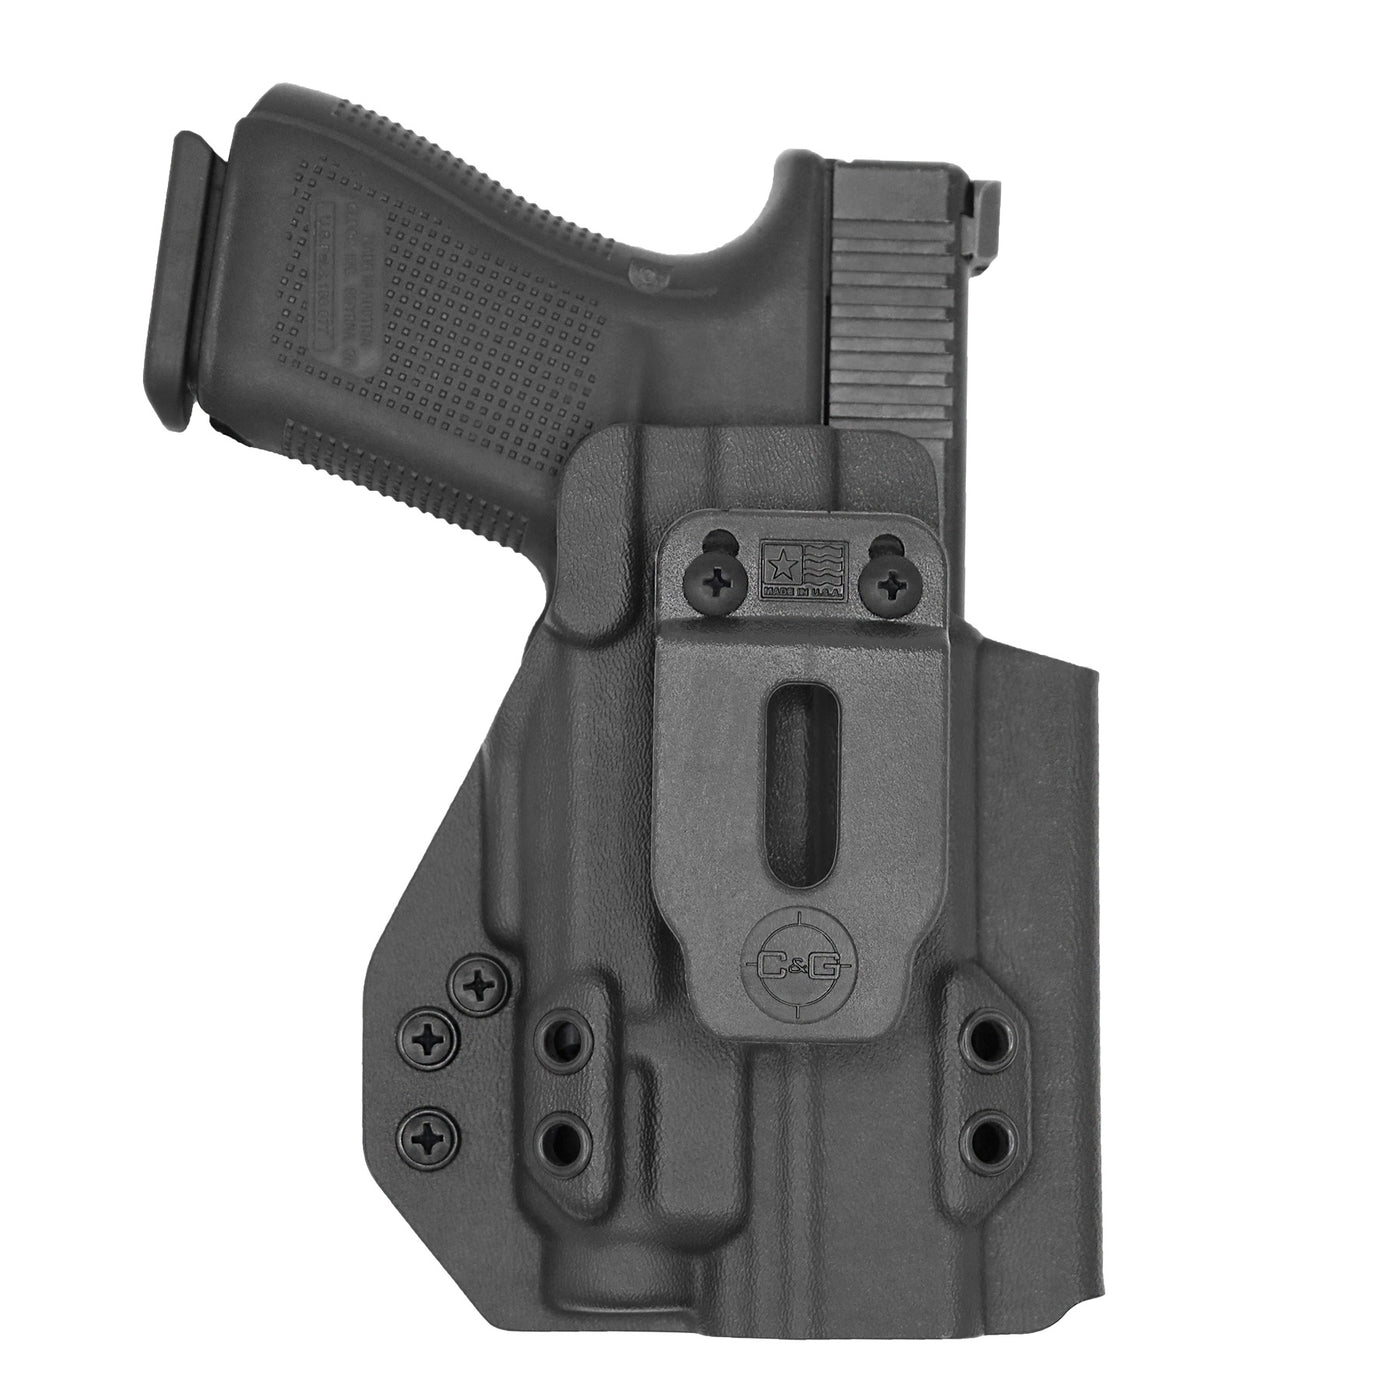 C&G Holsters quickship IWB Tactical Shadow Systems Streamlight TLR7 holstered